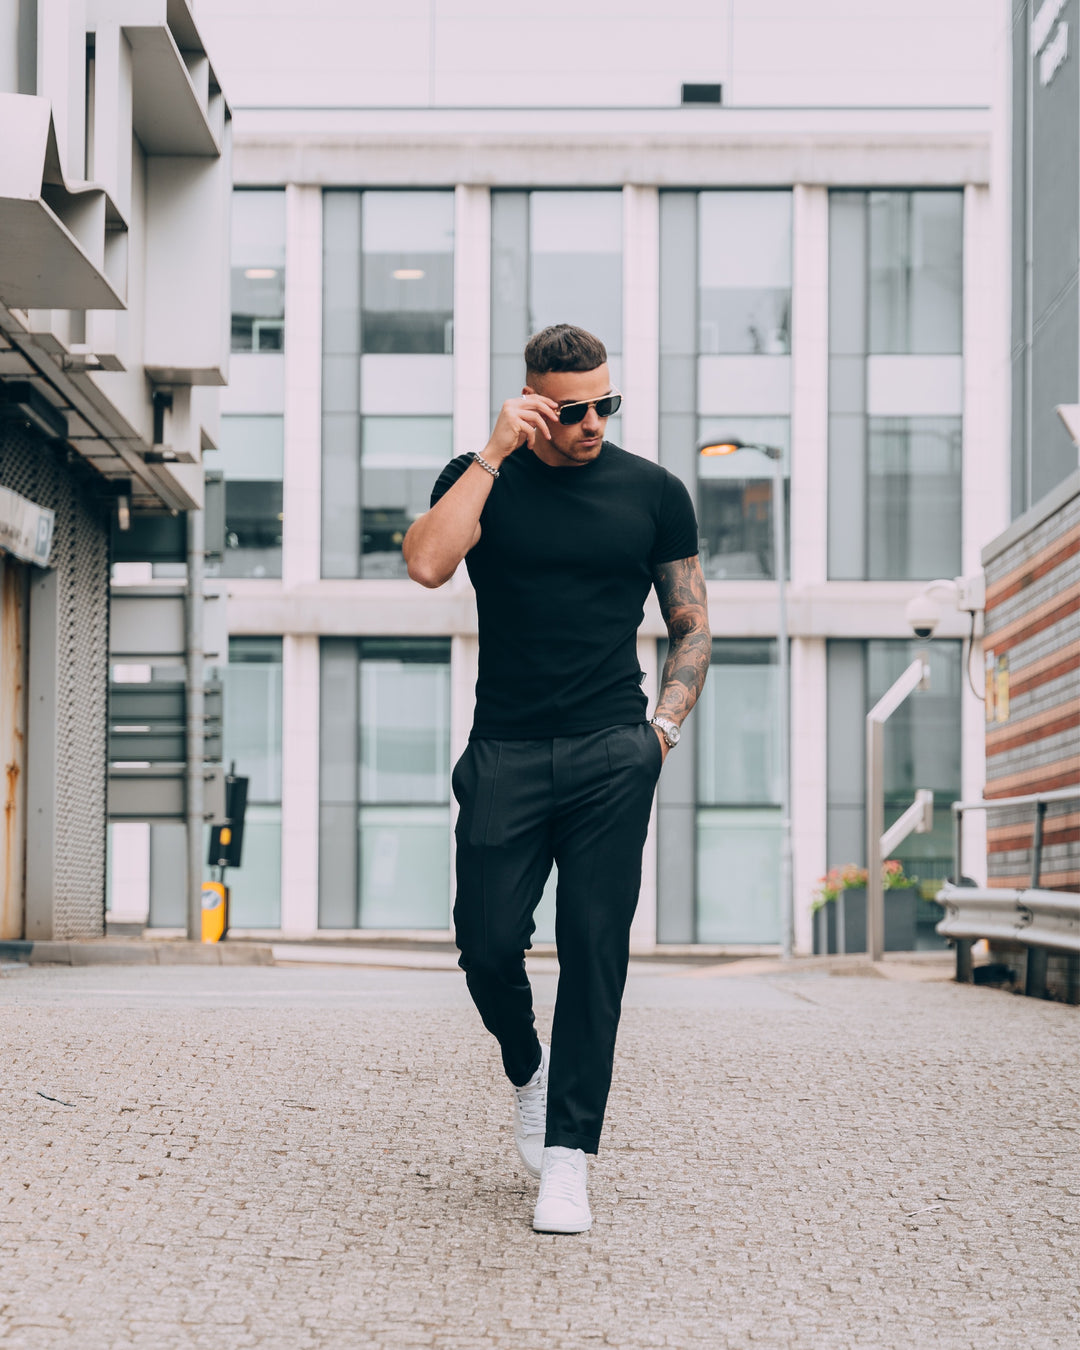 Black Tapered Fit T-Shirt